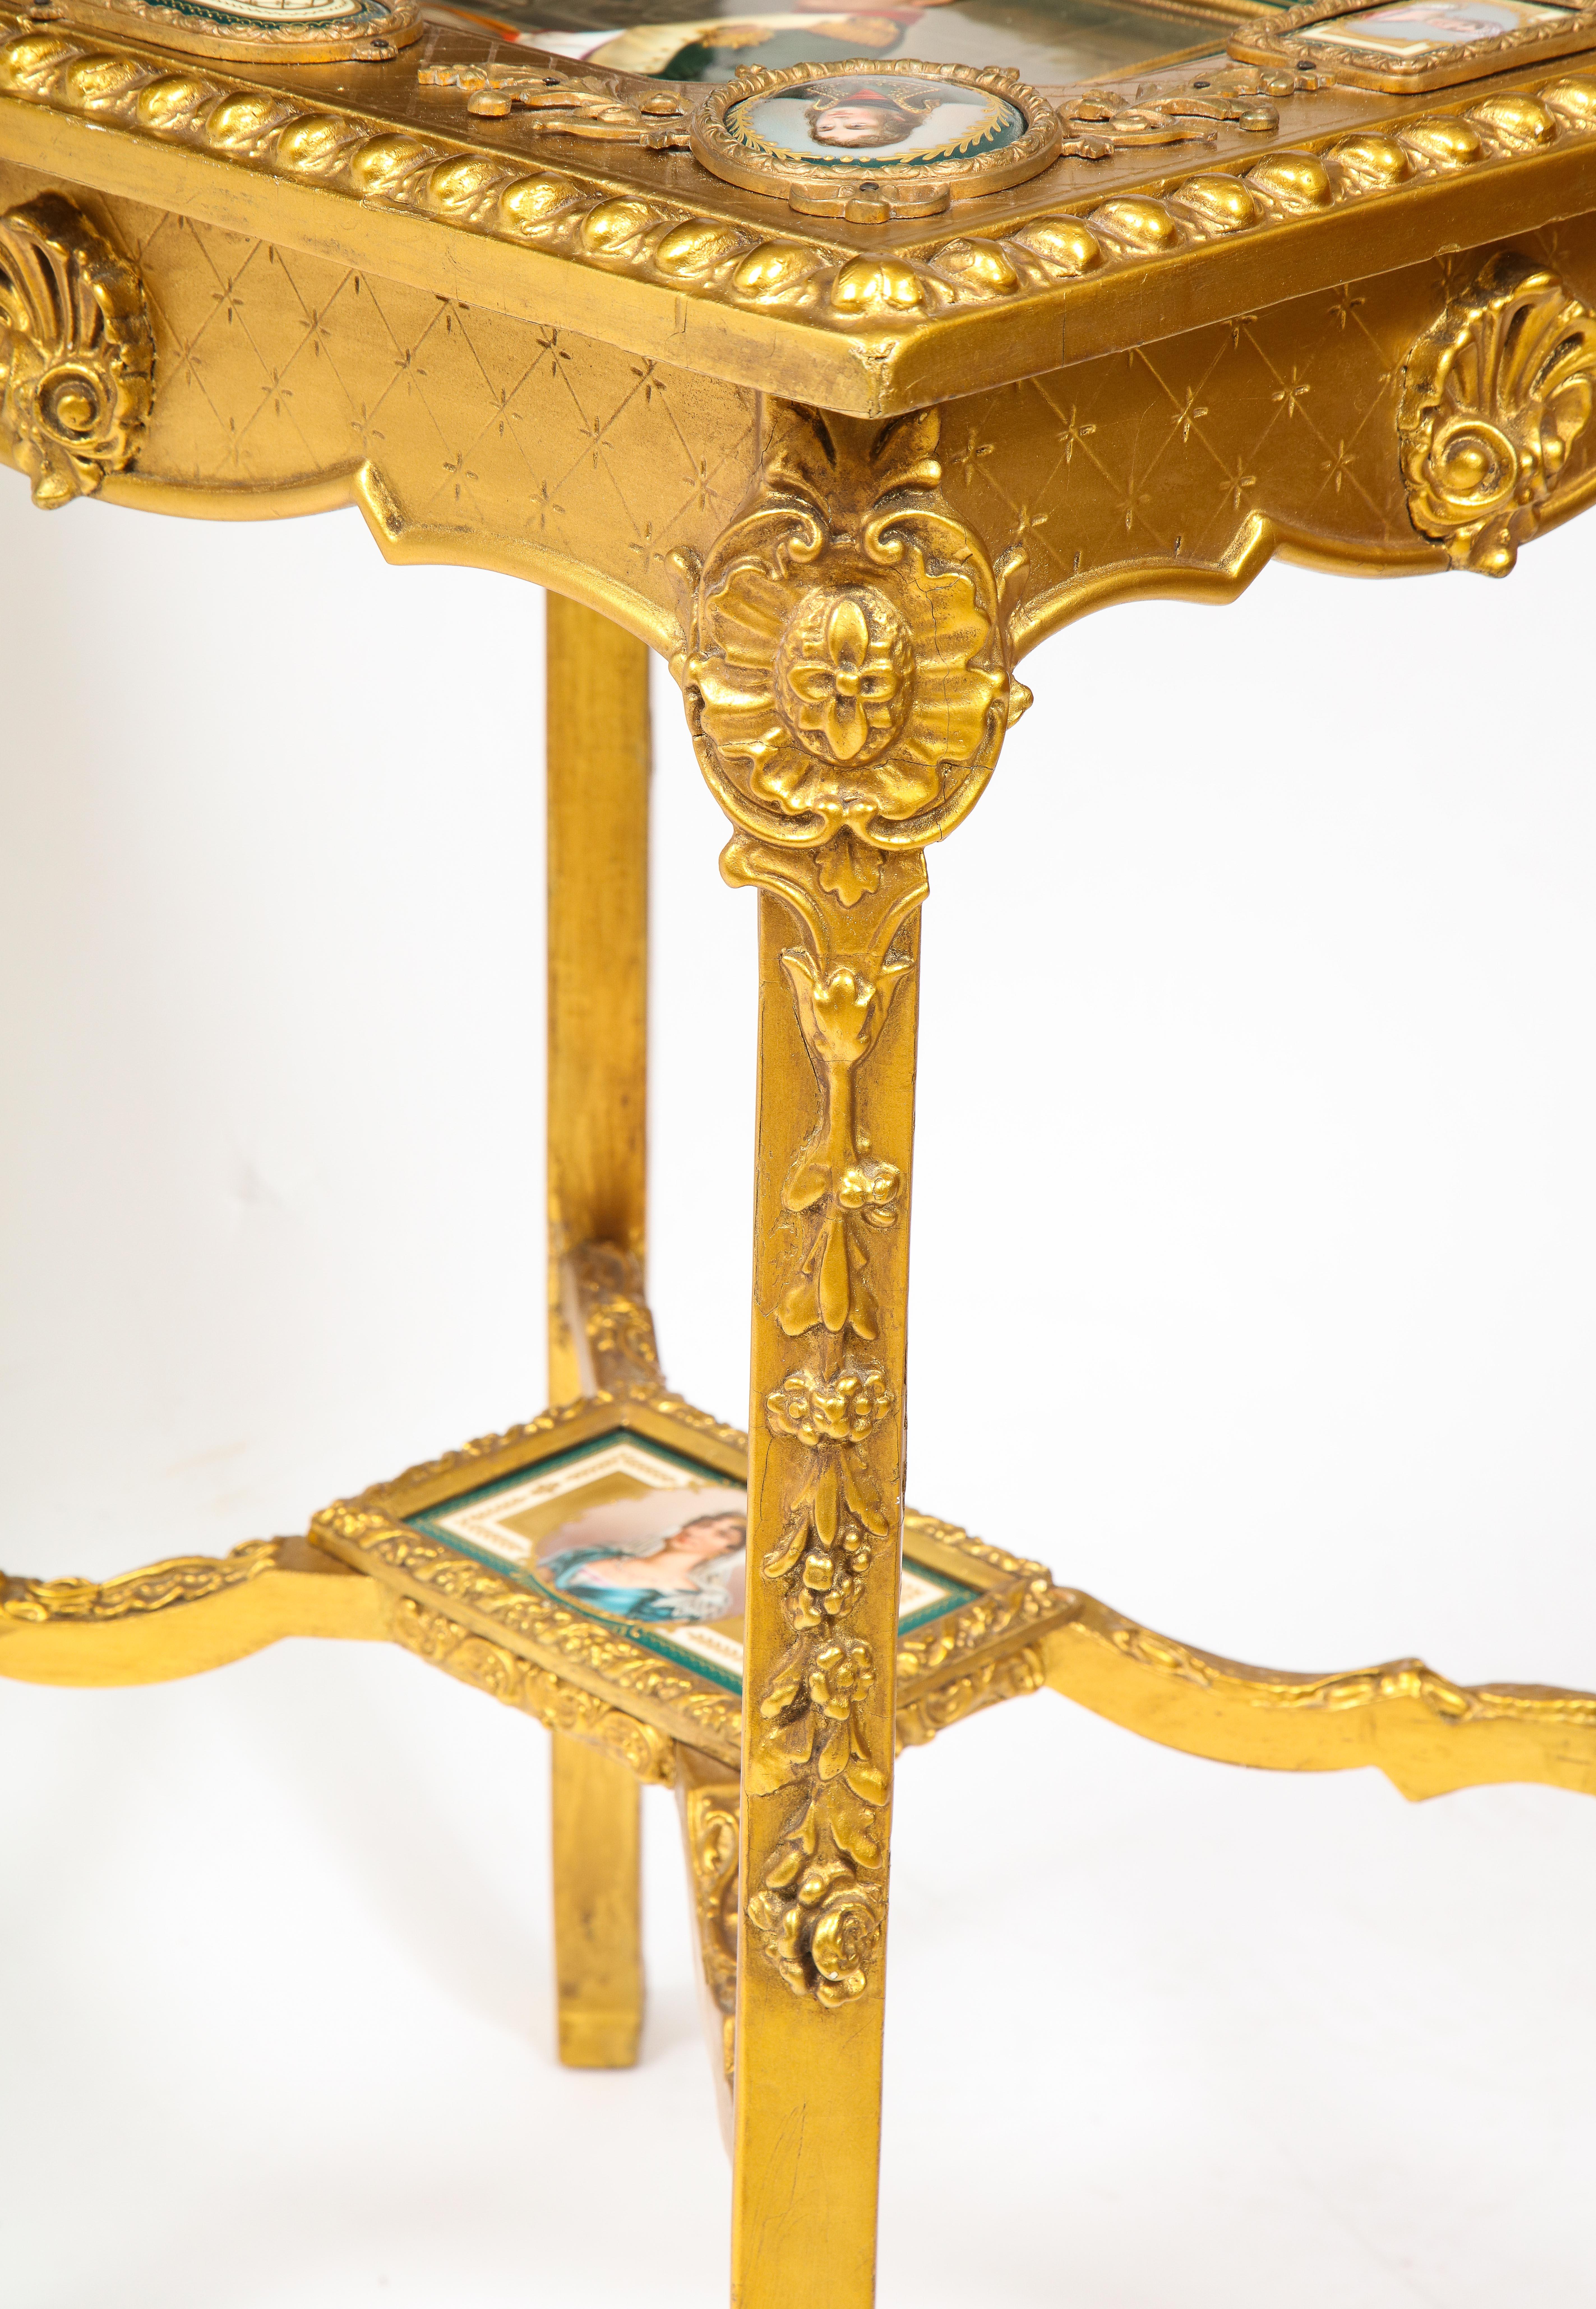 19th C. Napoleonic Royal Vienna Giltwood Side Table w/ Inlaid Porcelain Plaques For Sale 14